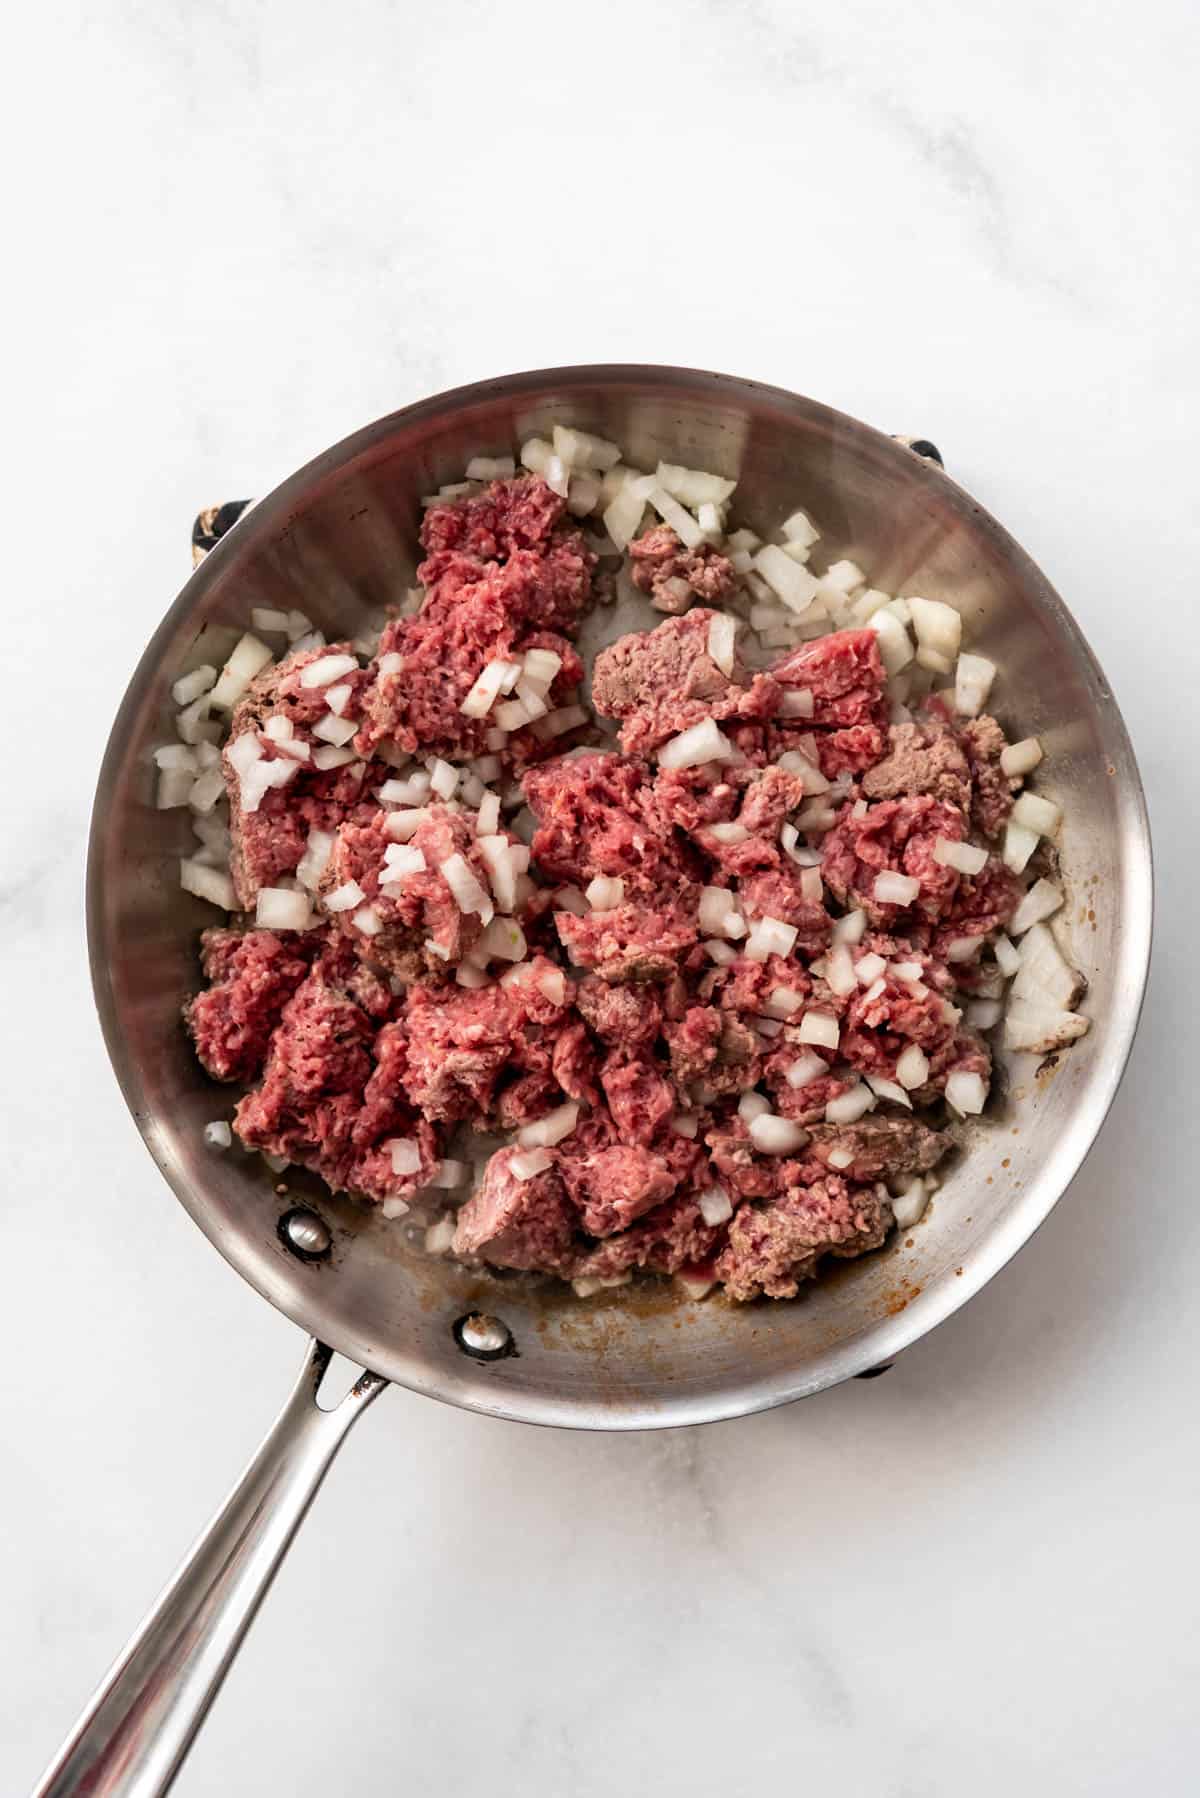 Browning ground beef in a pan with onions.